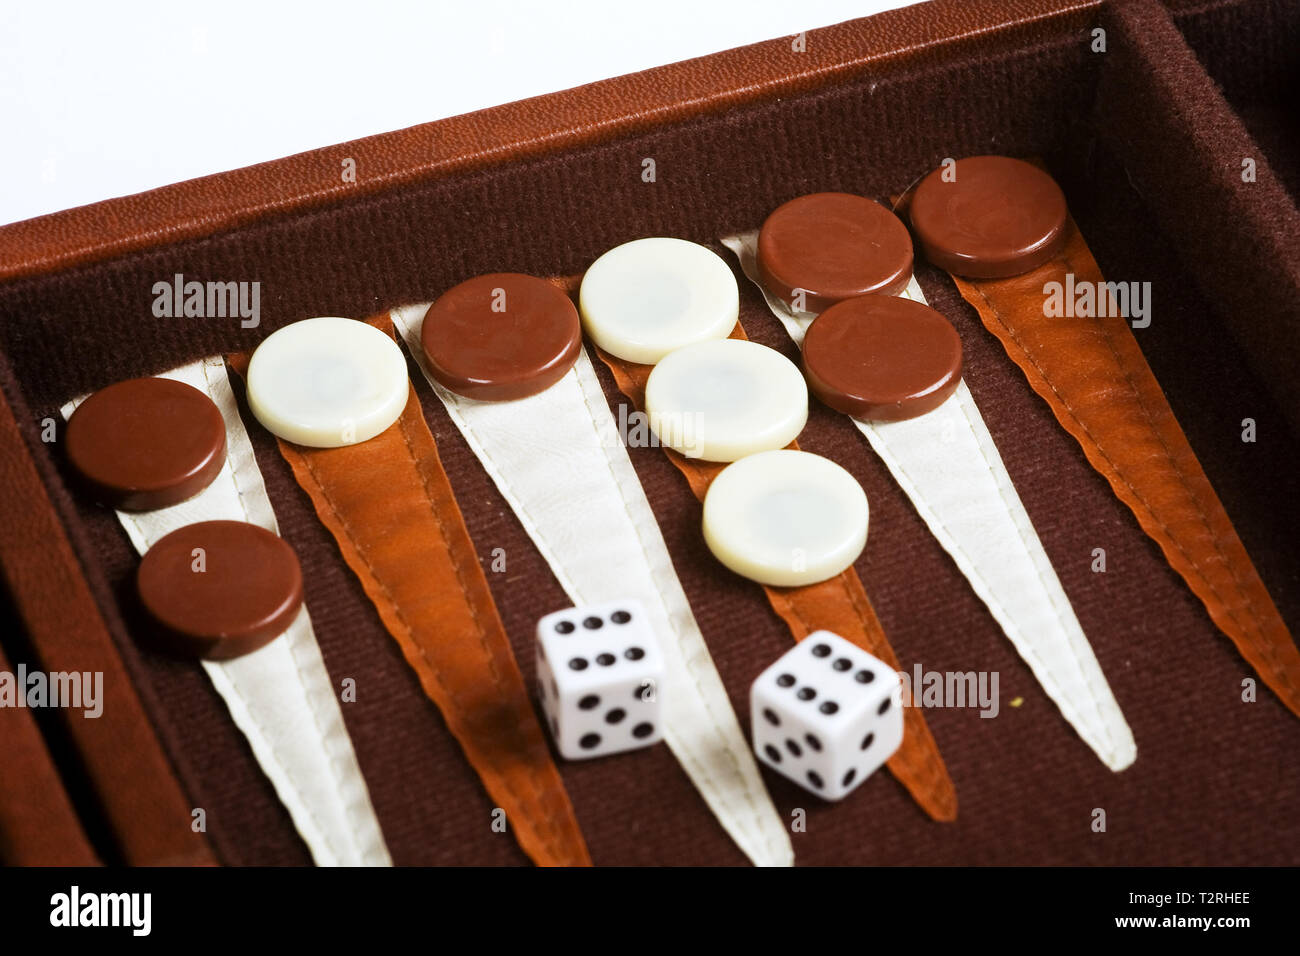 A backgammon game. Pieces and dice. Stock Photo